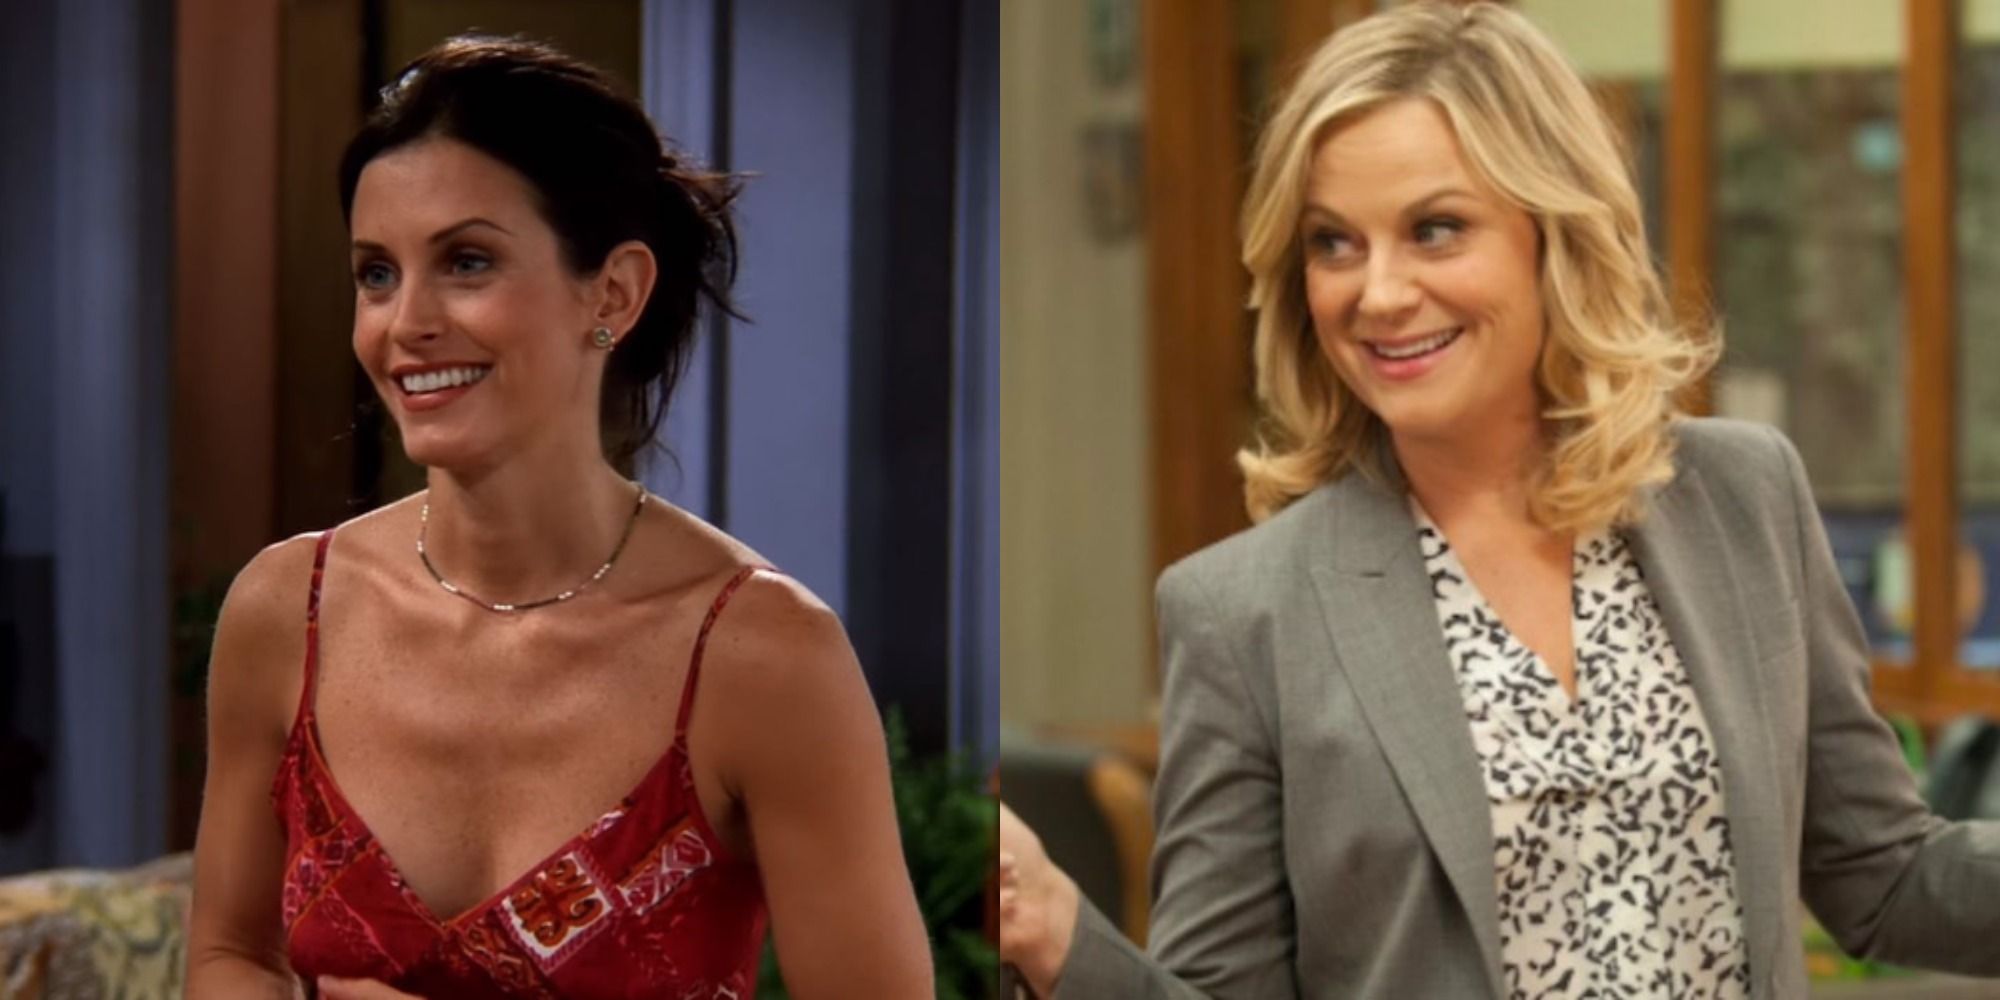 Split image of Monica from Friends and Leslie from Parks and Recreation